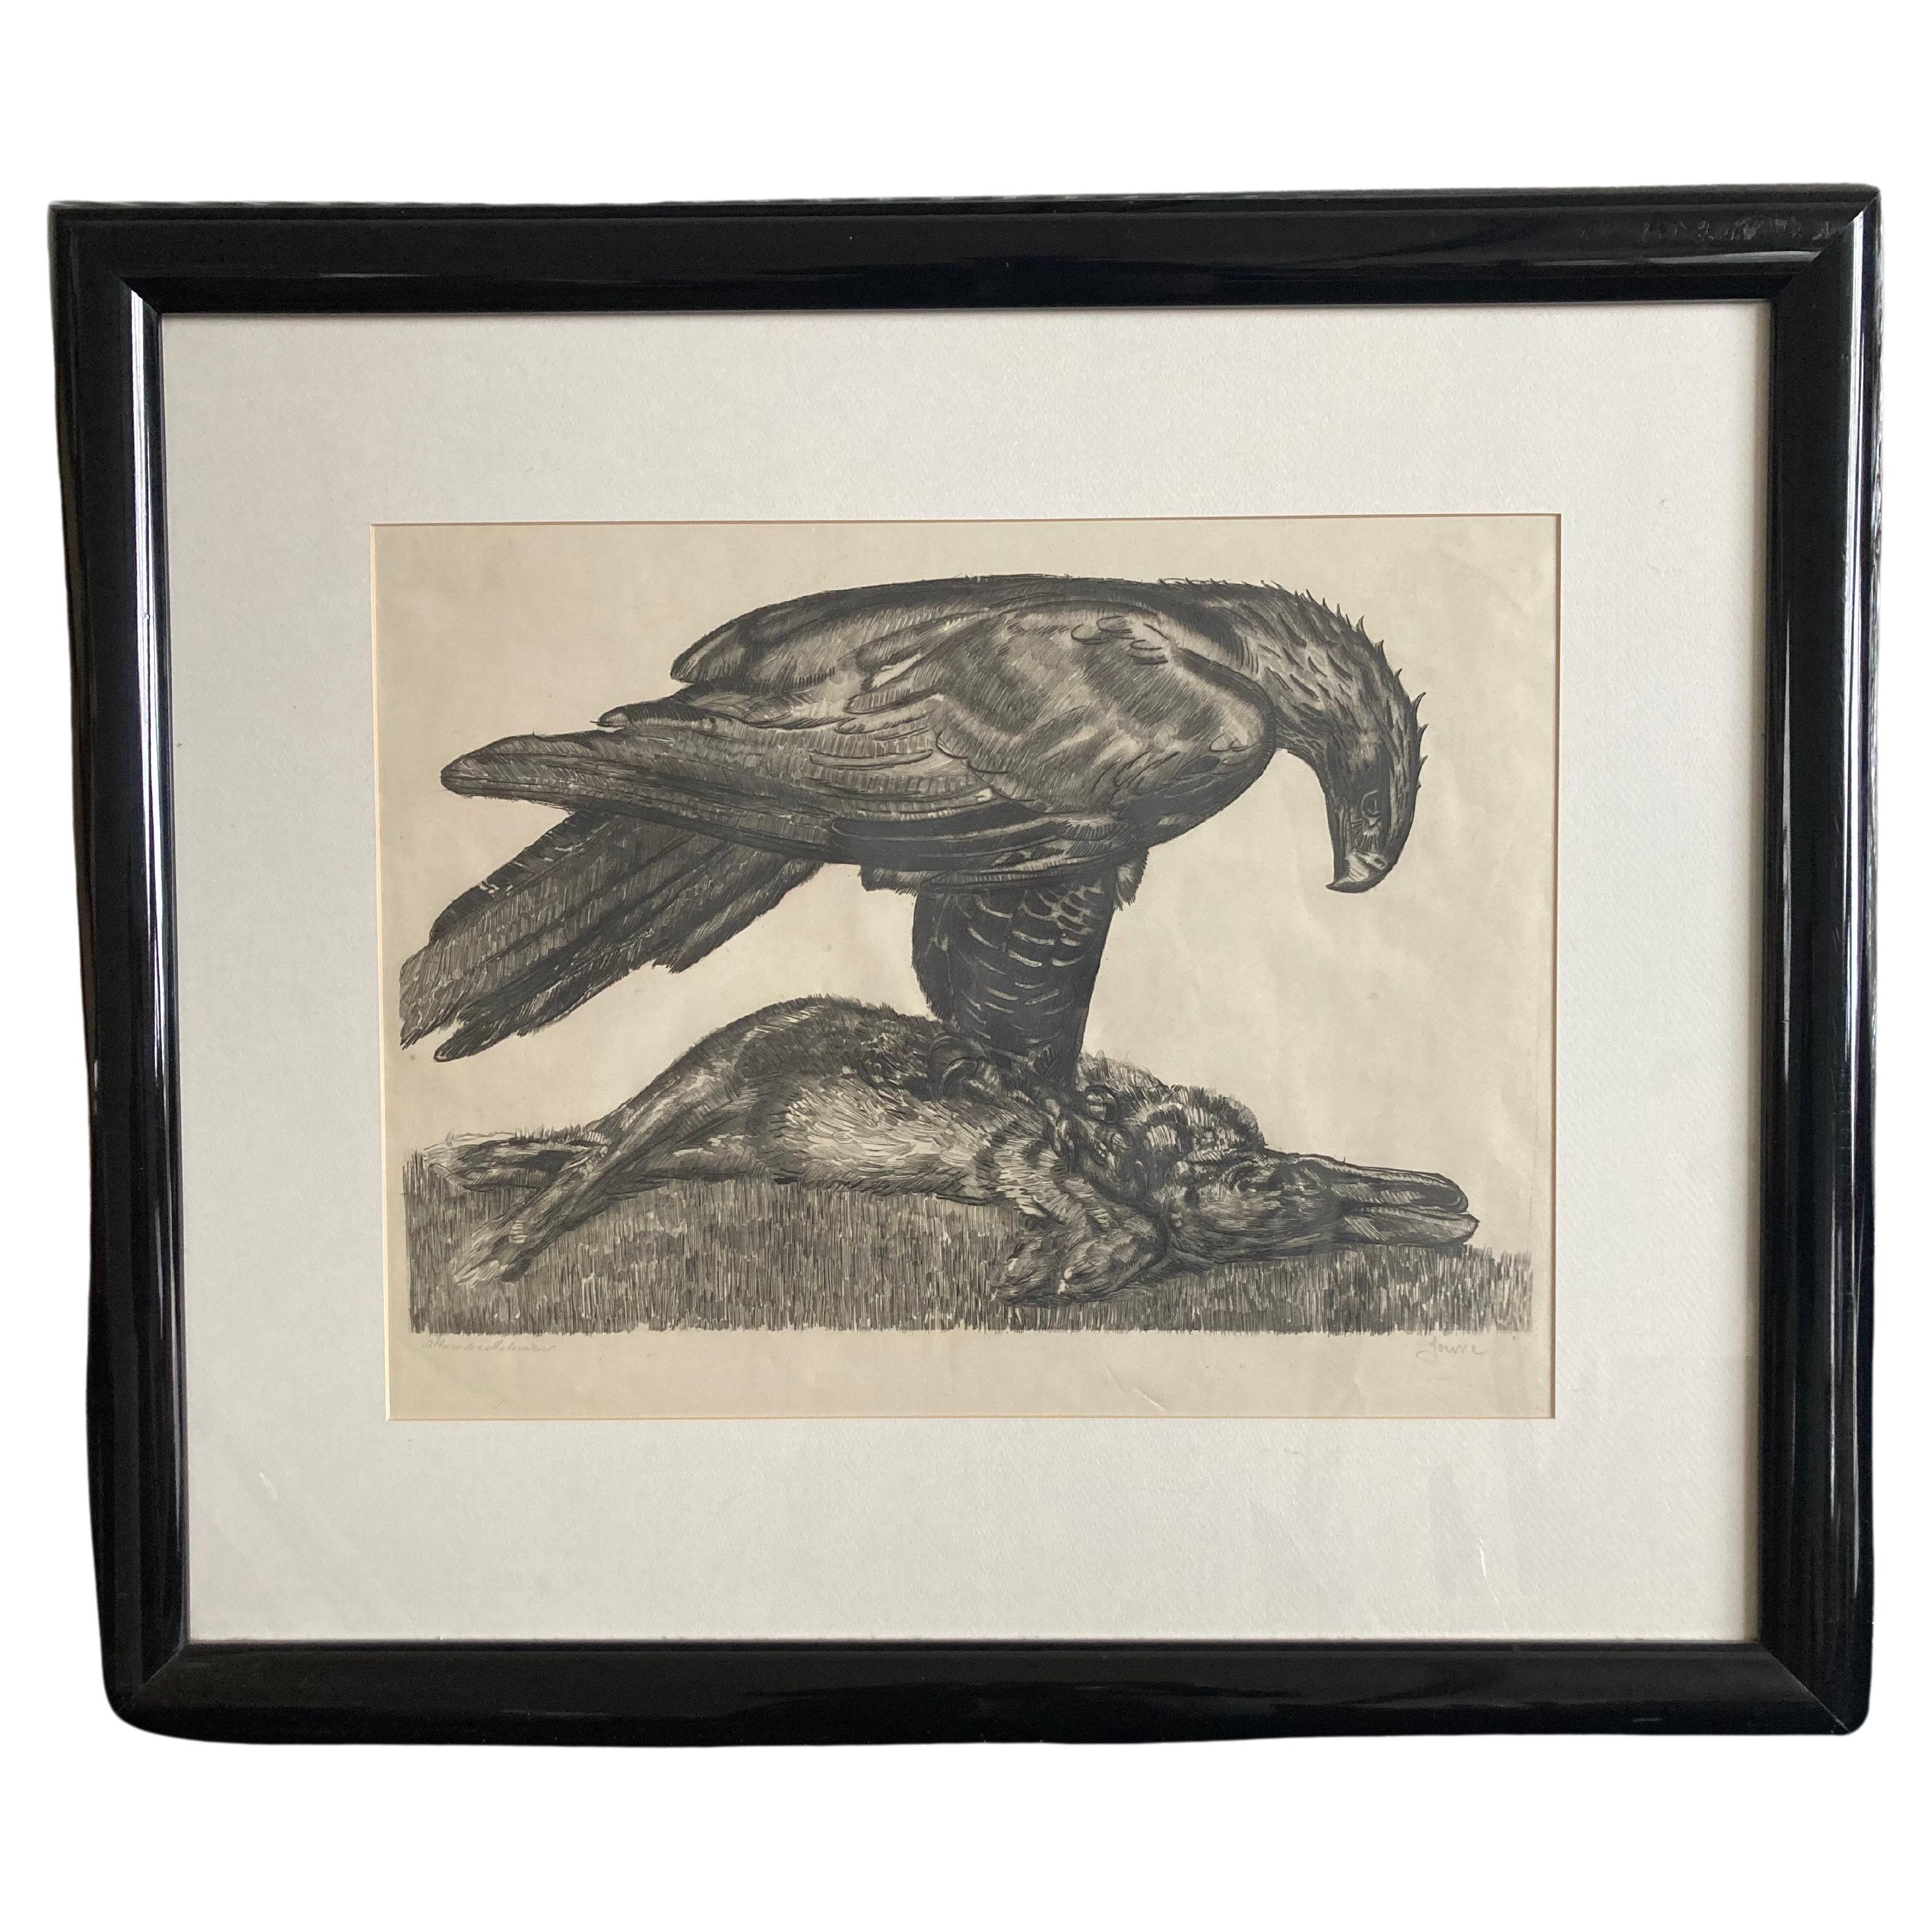  Art Déco lithograph "Aigle with hare" by Paul Jouve. France 1930s. Signed. For Sale